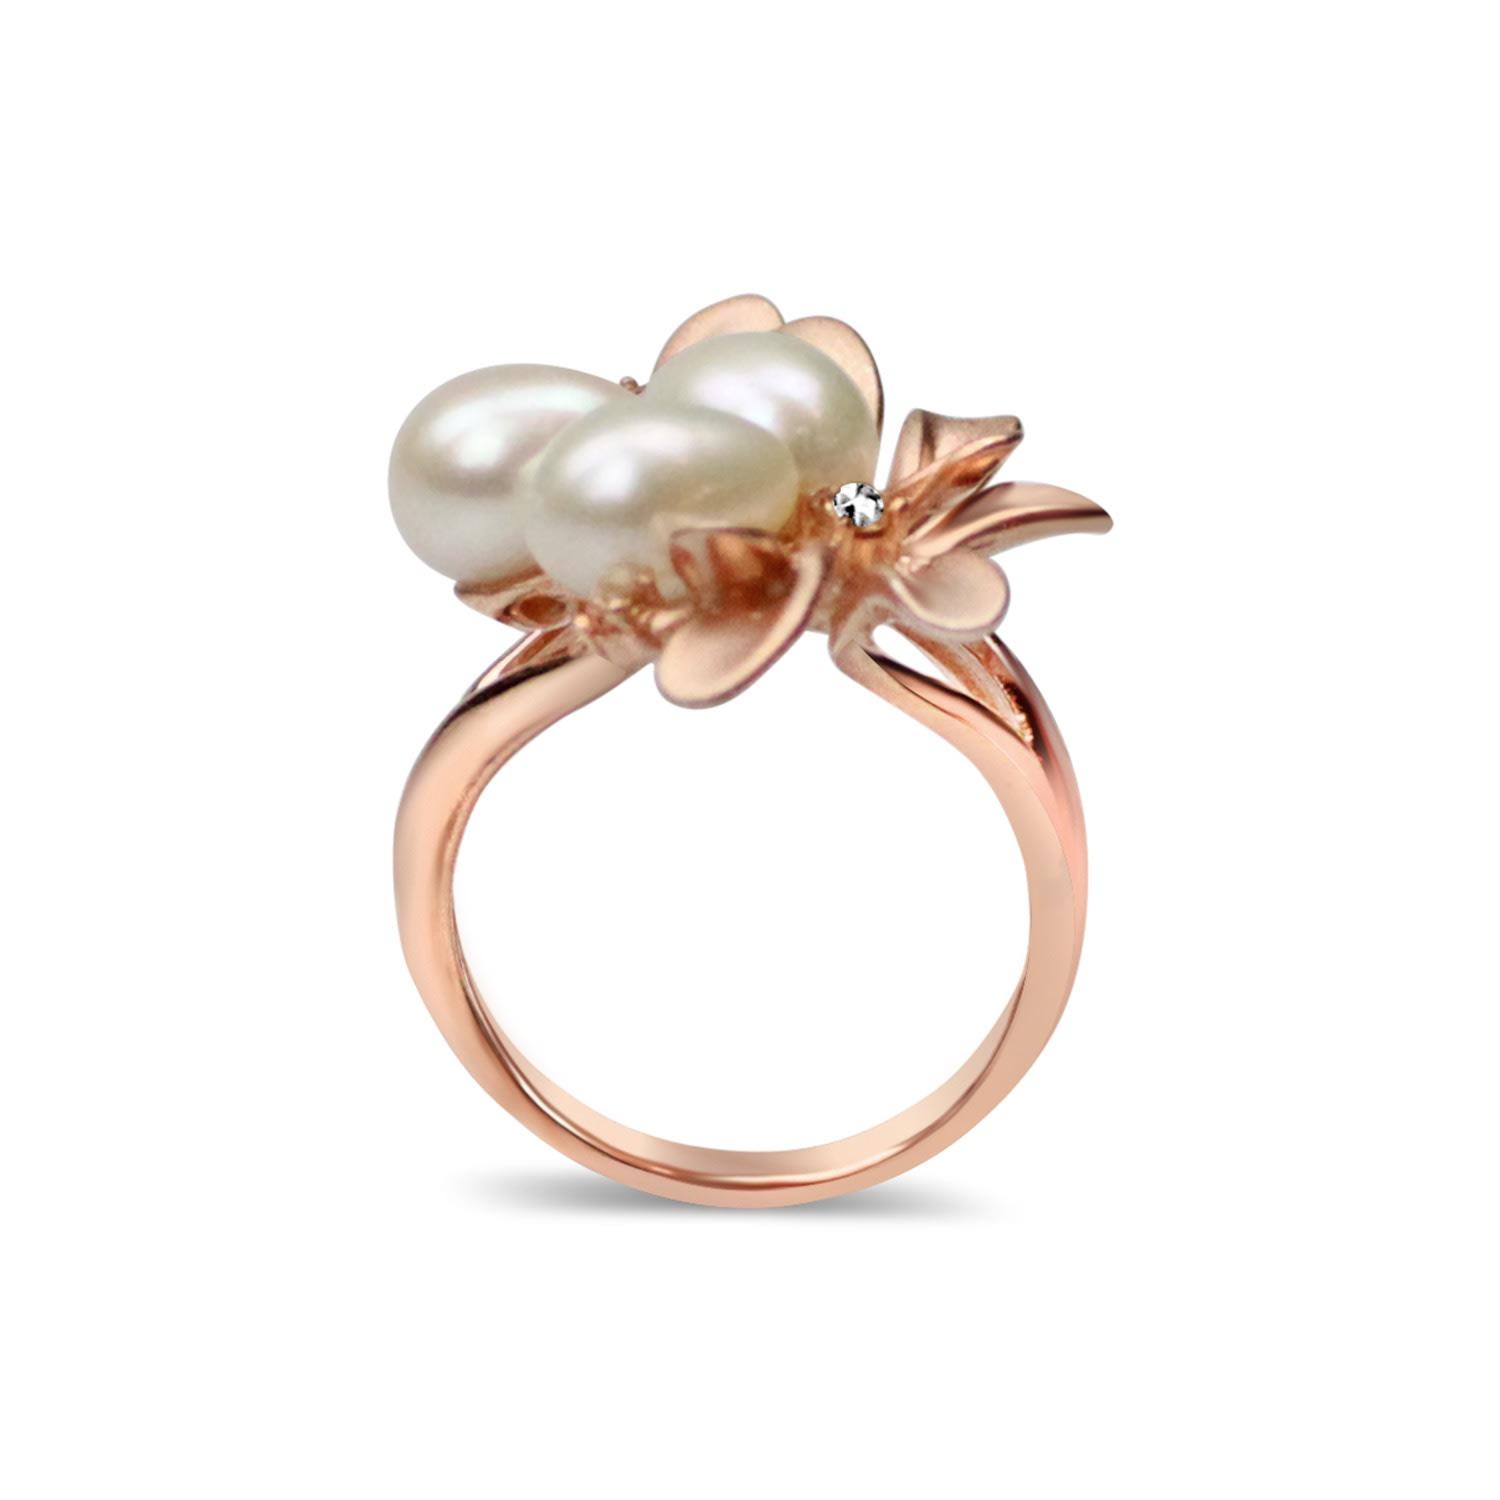 Bellus Domina Gold Plated Freshwater Pearl Ring in Metallic - Lyst